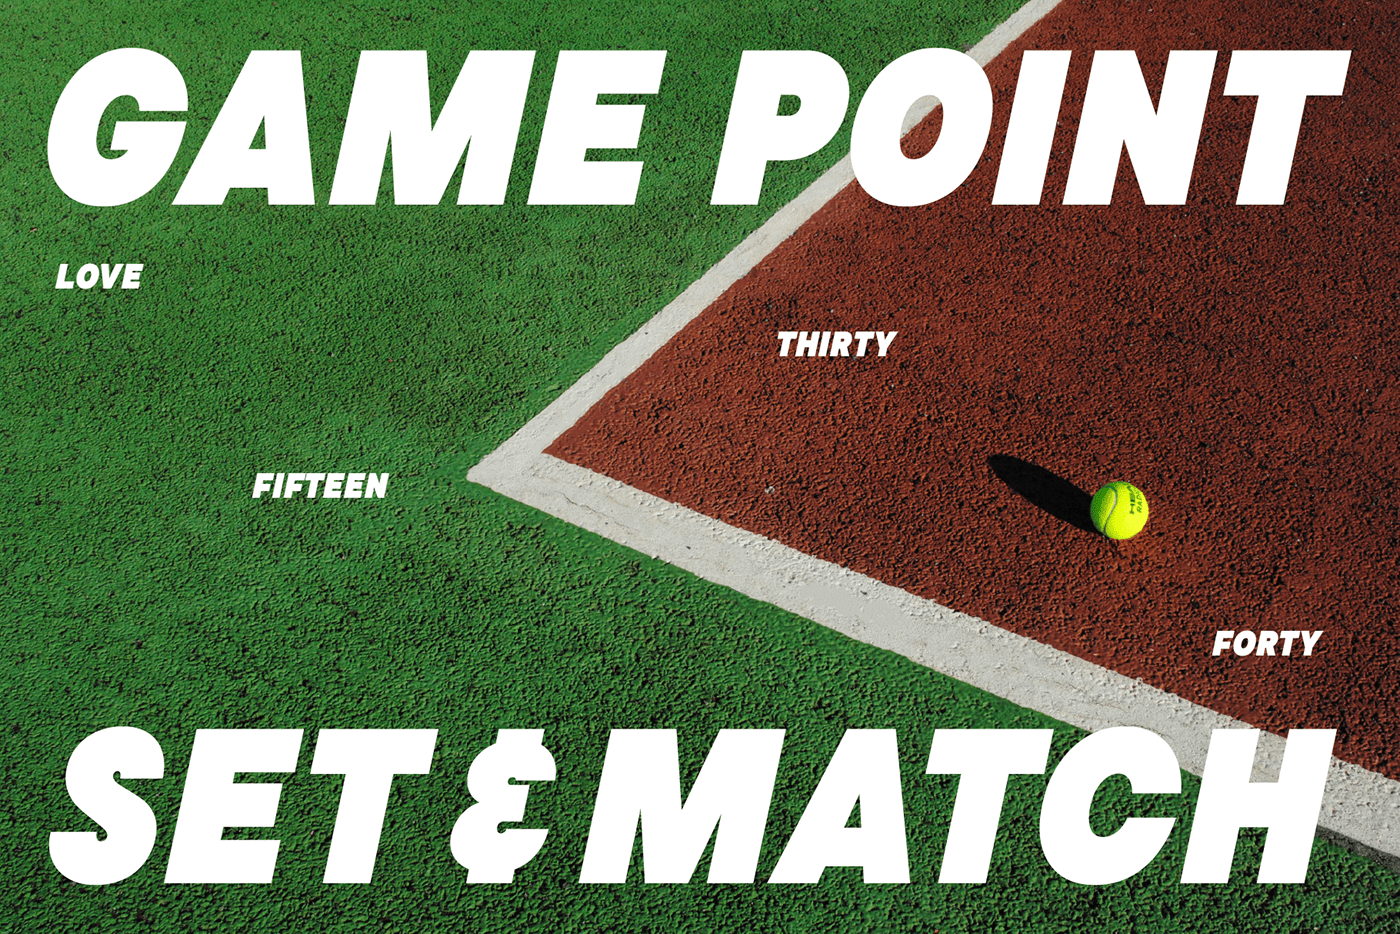 game set match graphic over a tennis court